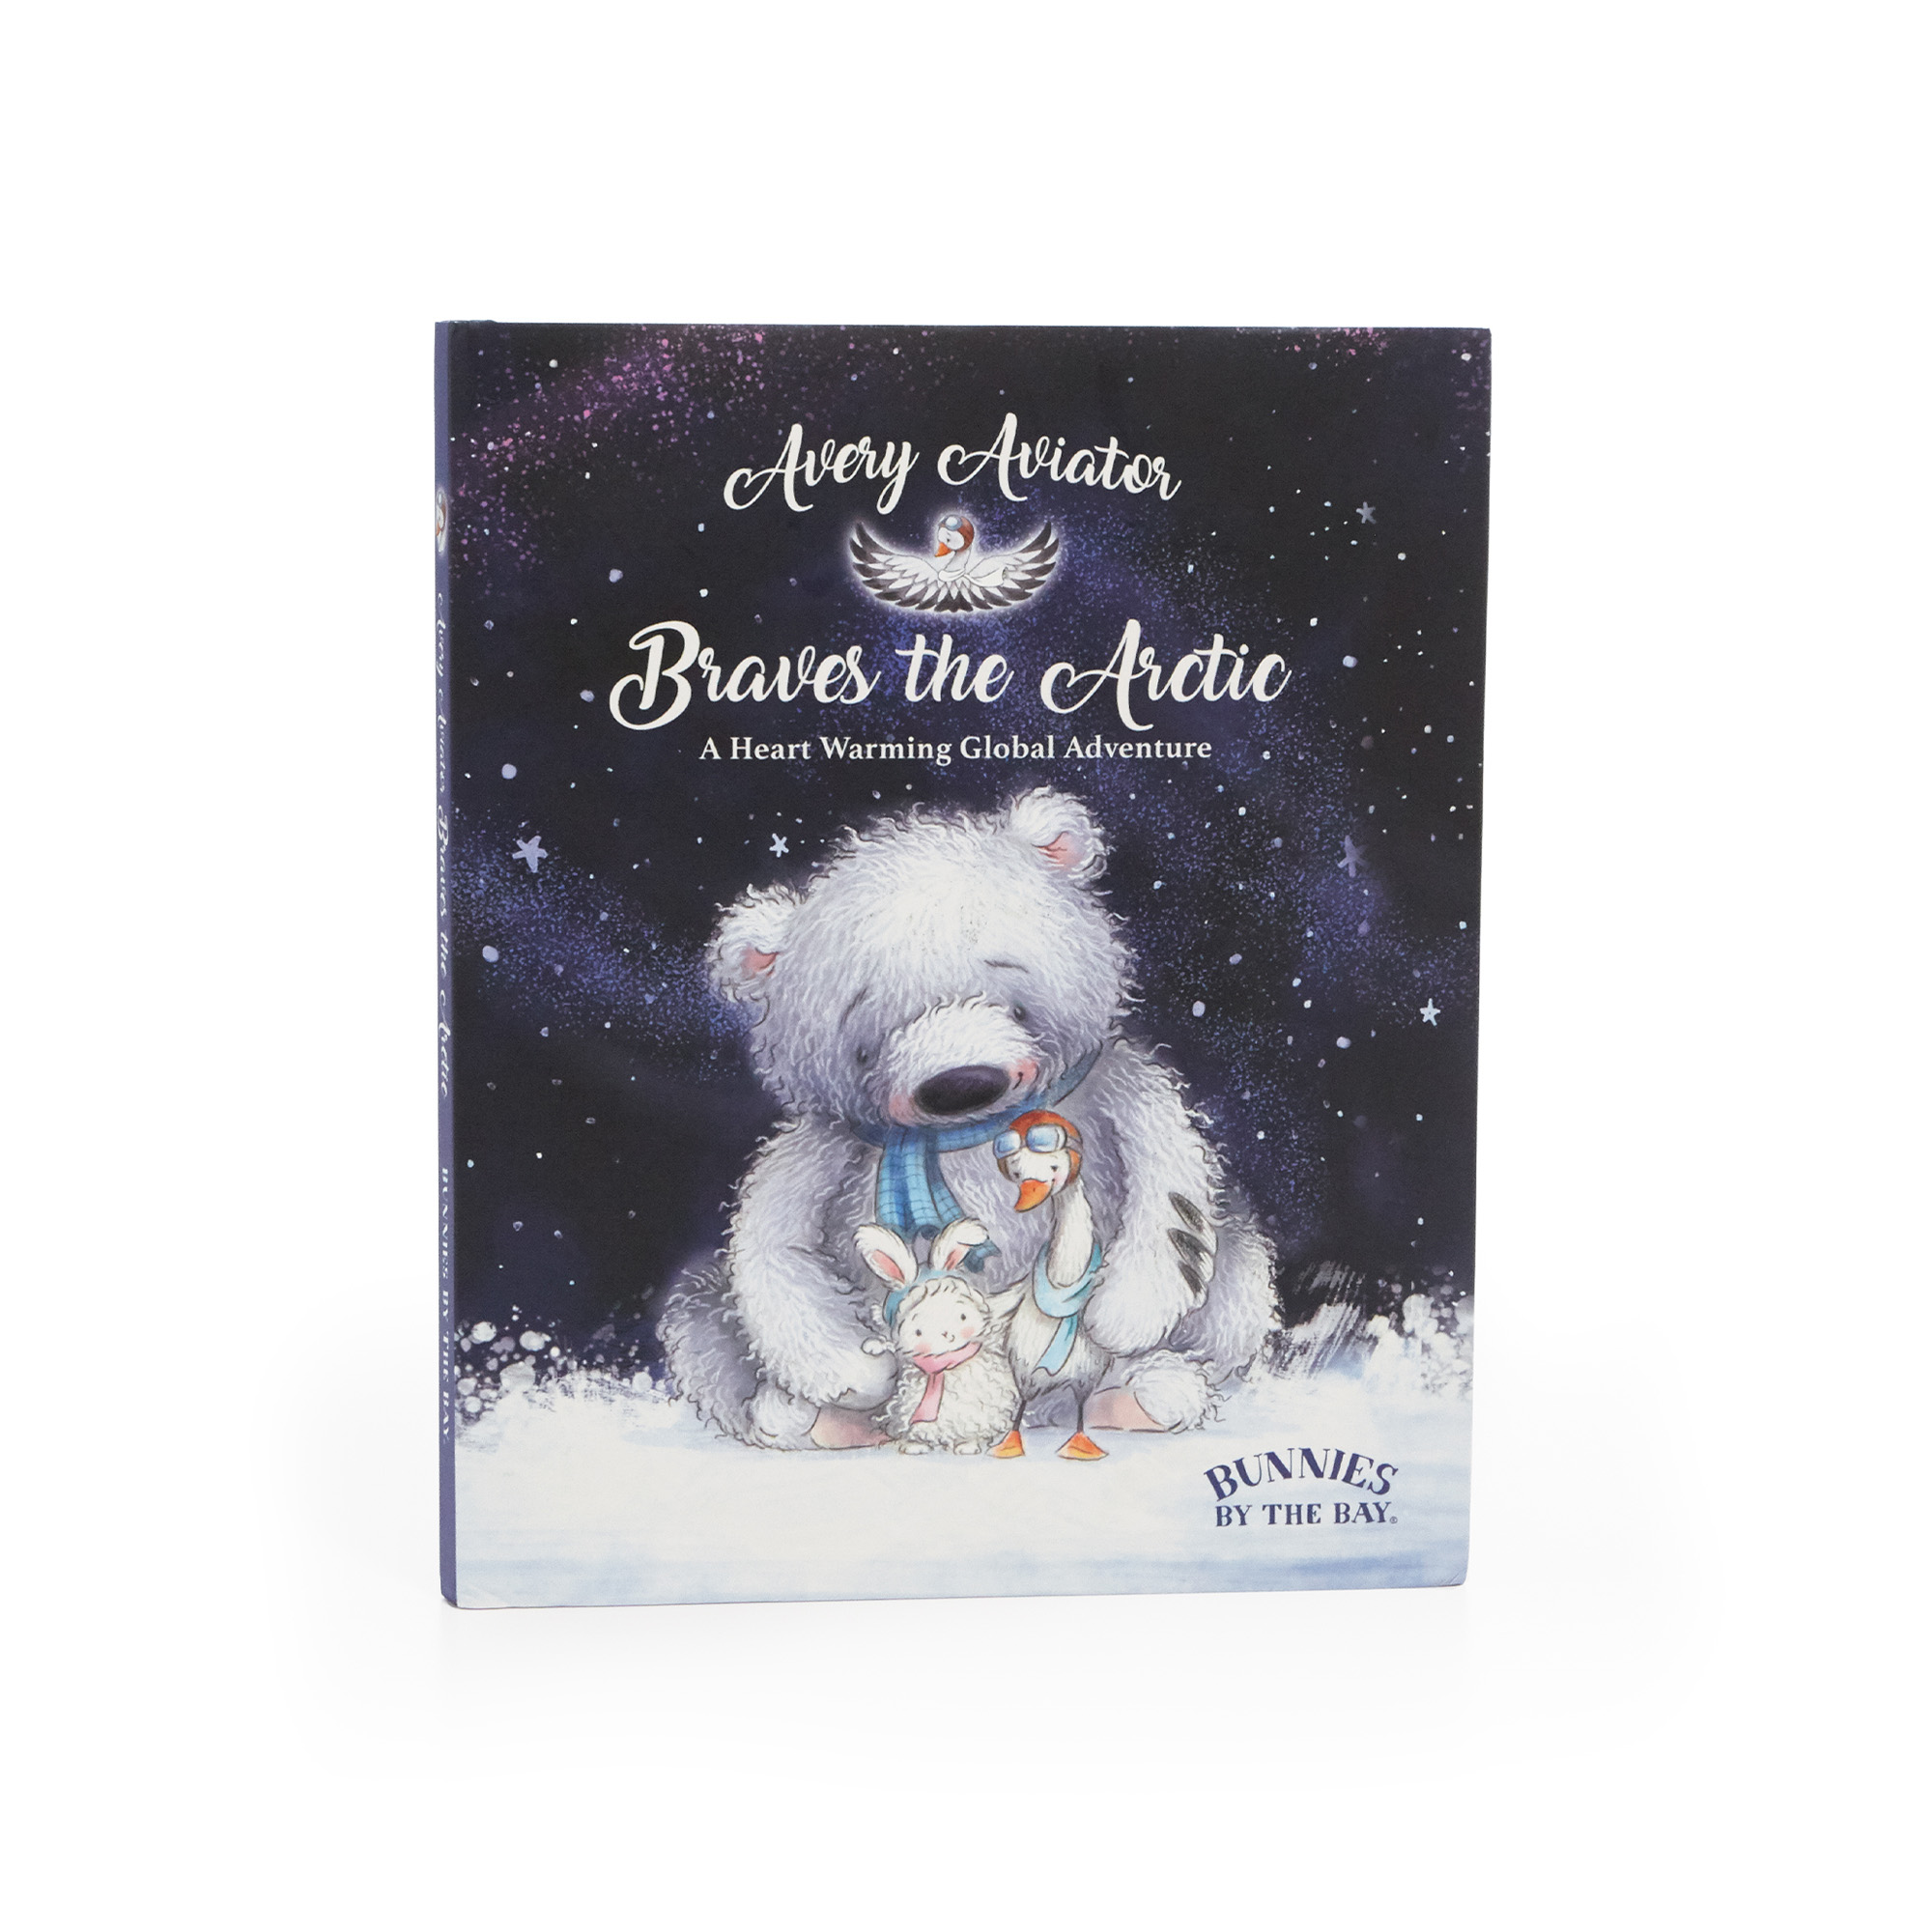 Libro illustrato Avery the Aviator Braves the Arctic - Bunnies By The Bay